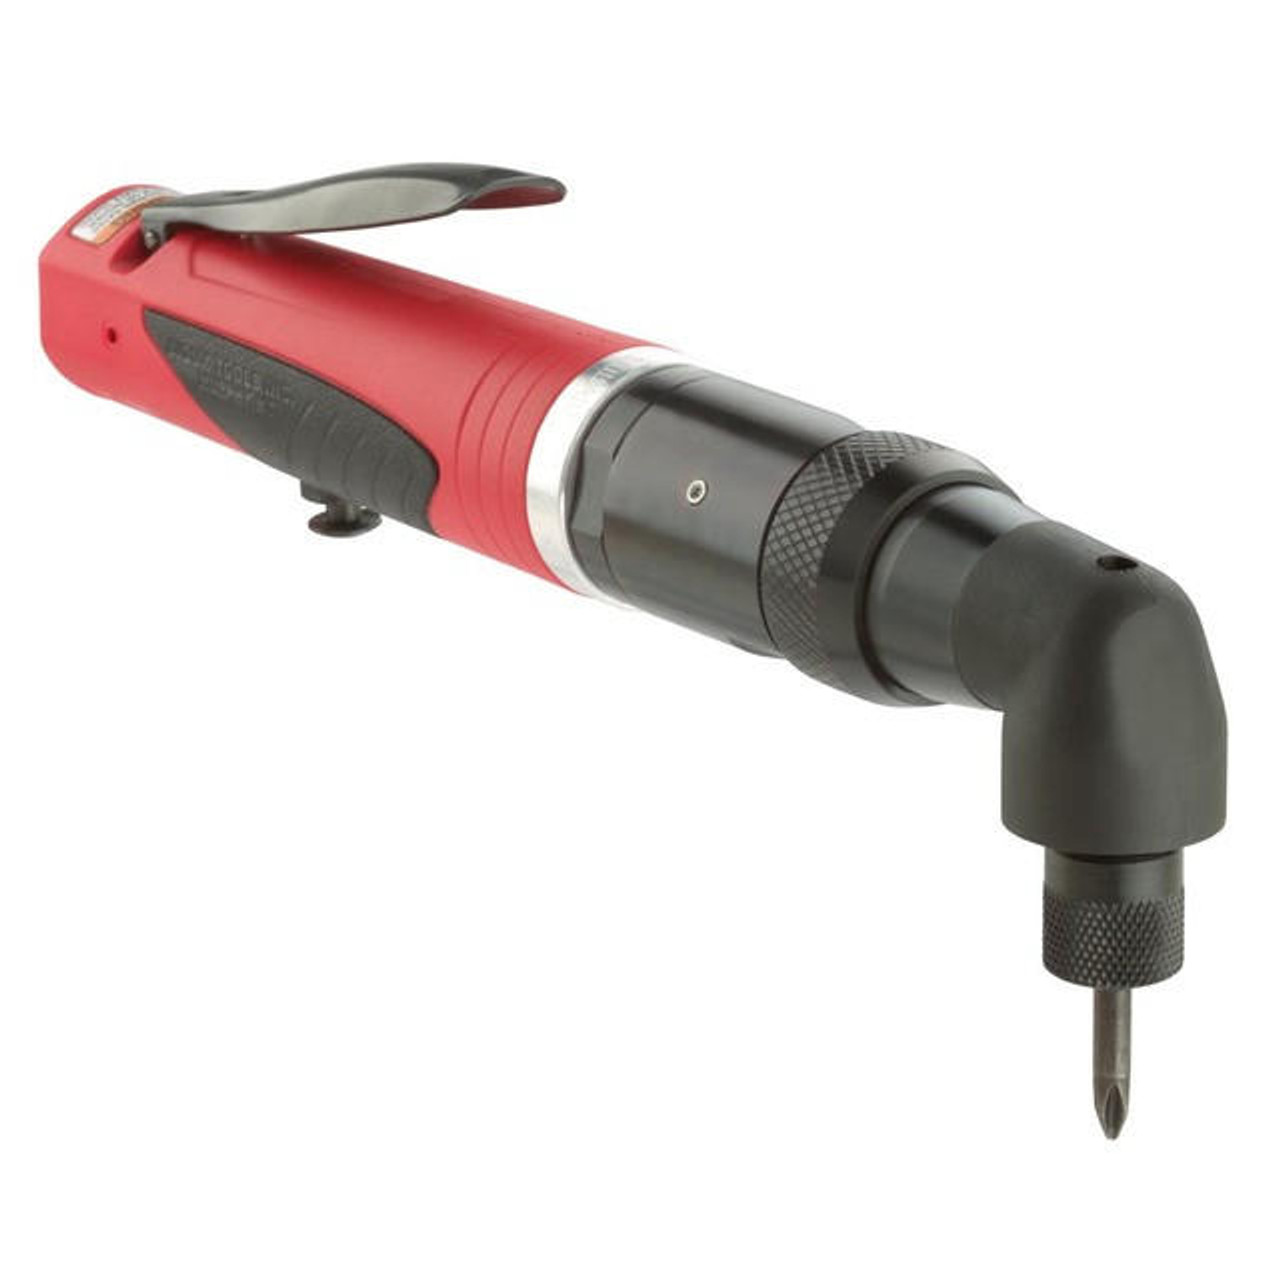  Sioux Tools SSD10A6S Stall Right Angle Screwdriver | 1/4" Quick Change | 600 RPM | 220 in.-lb. Max Torque 